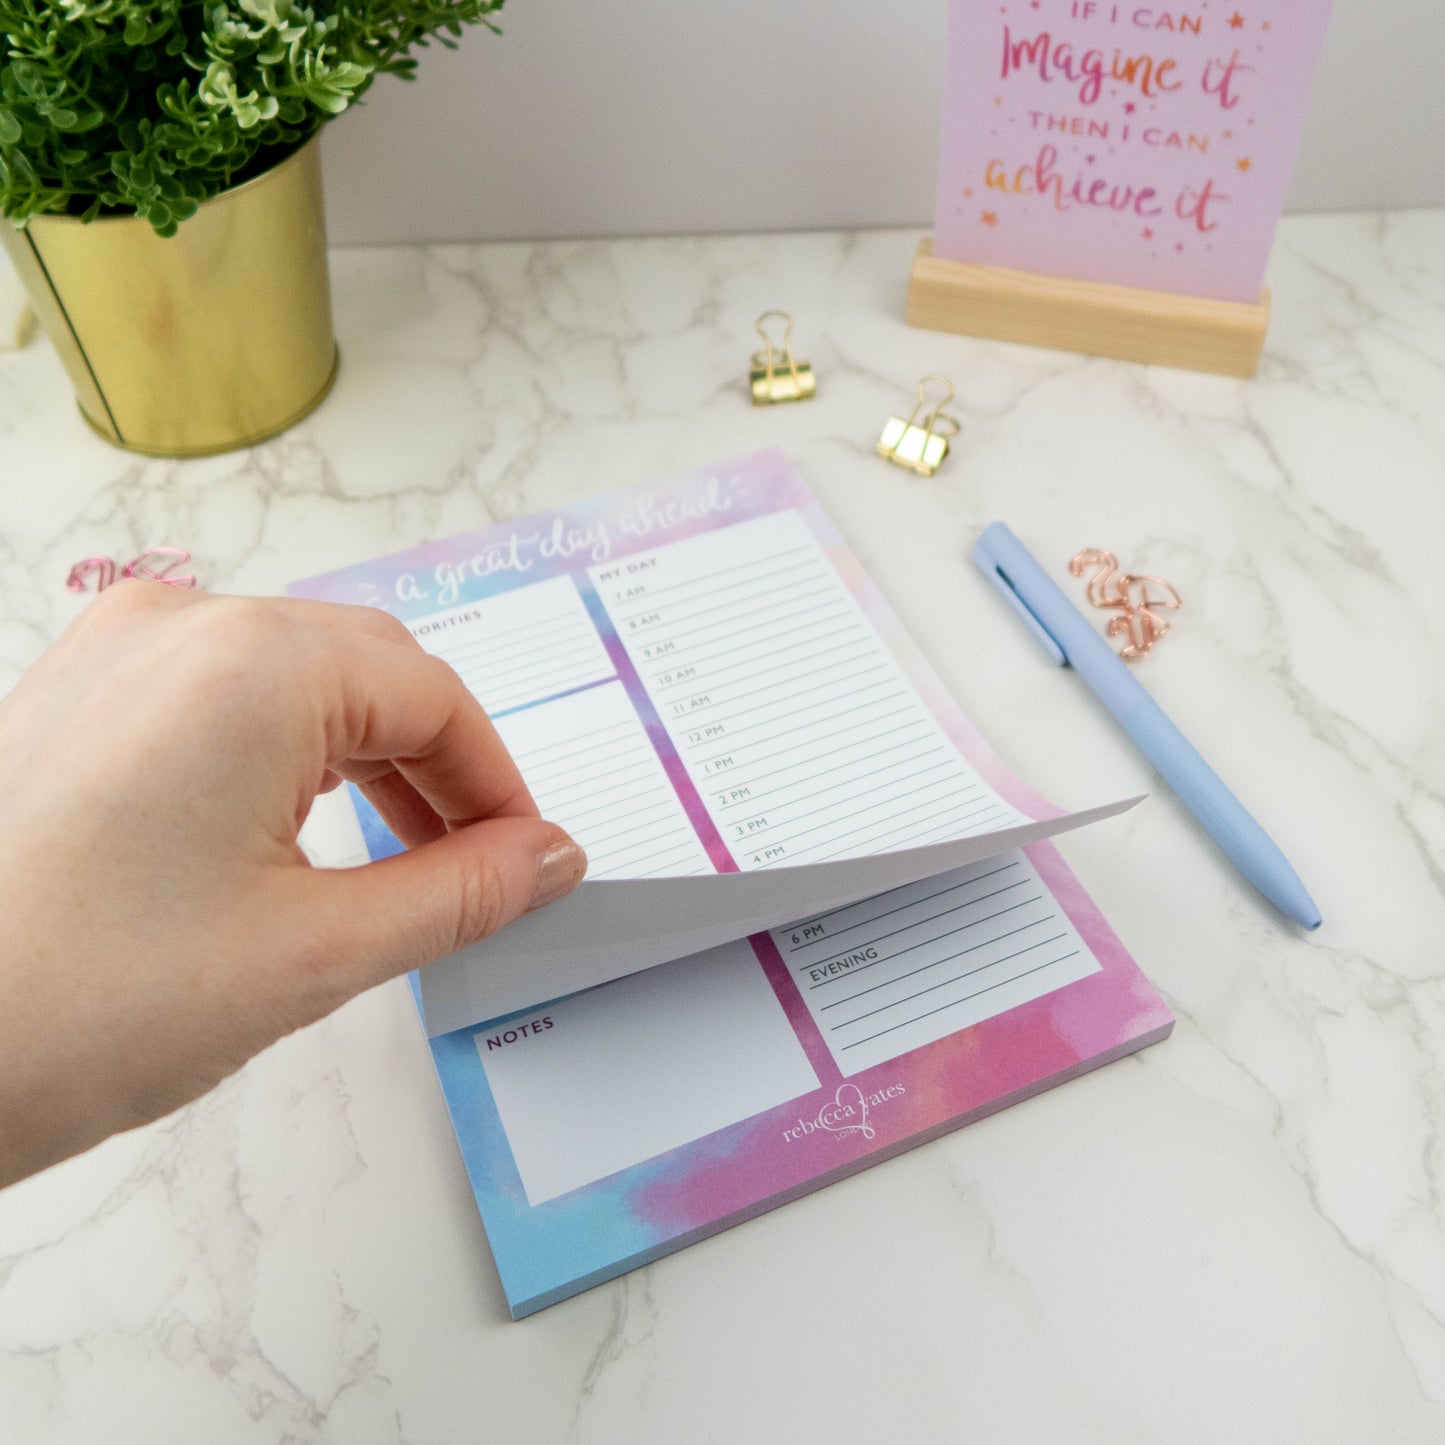 A GREAT DAY AHEAD - DAY PLANNER PAD (OPAL)